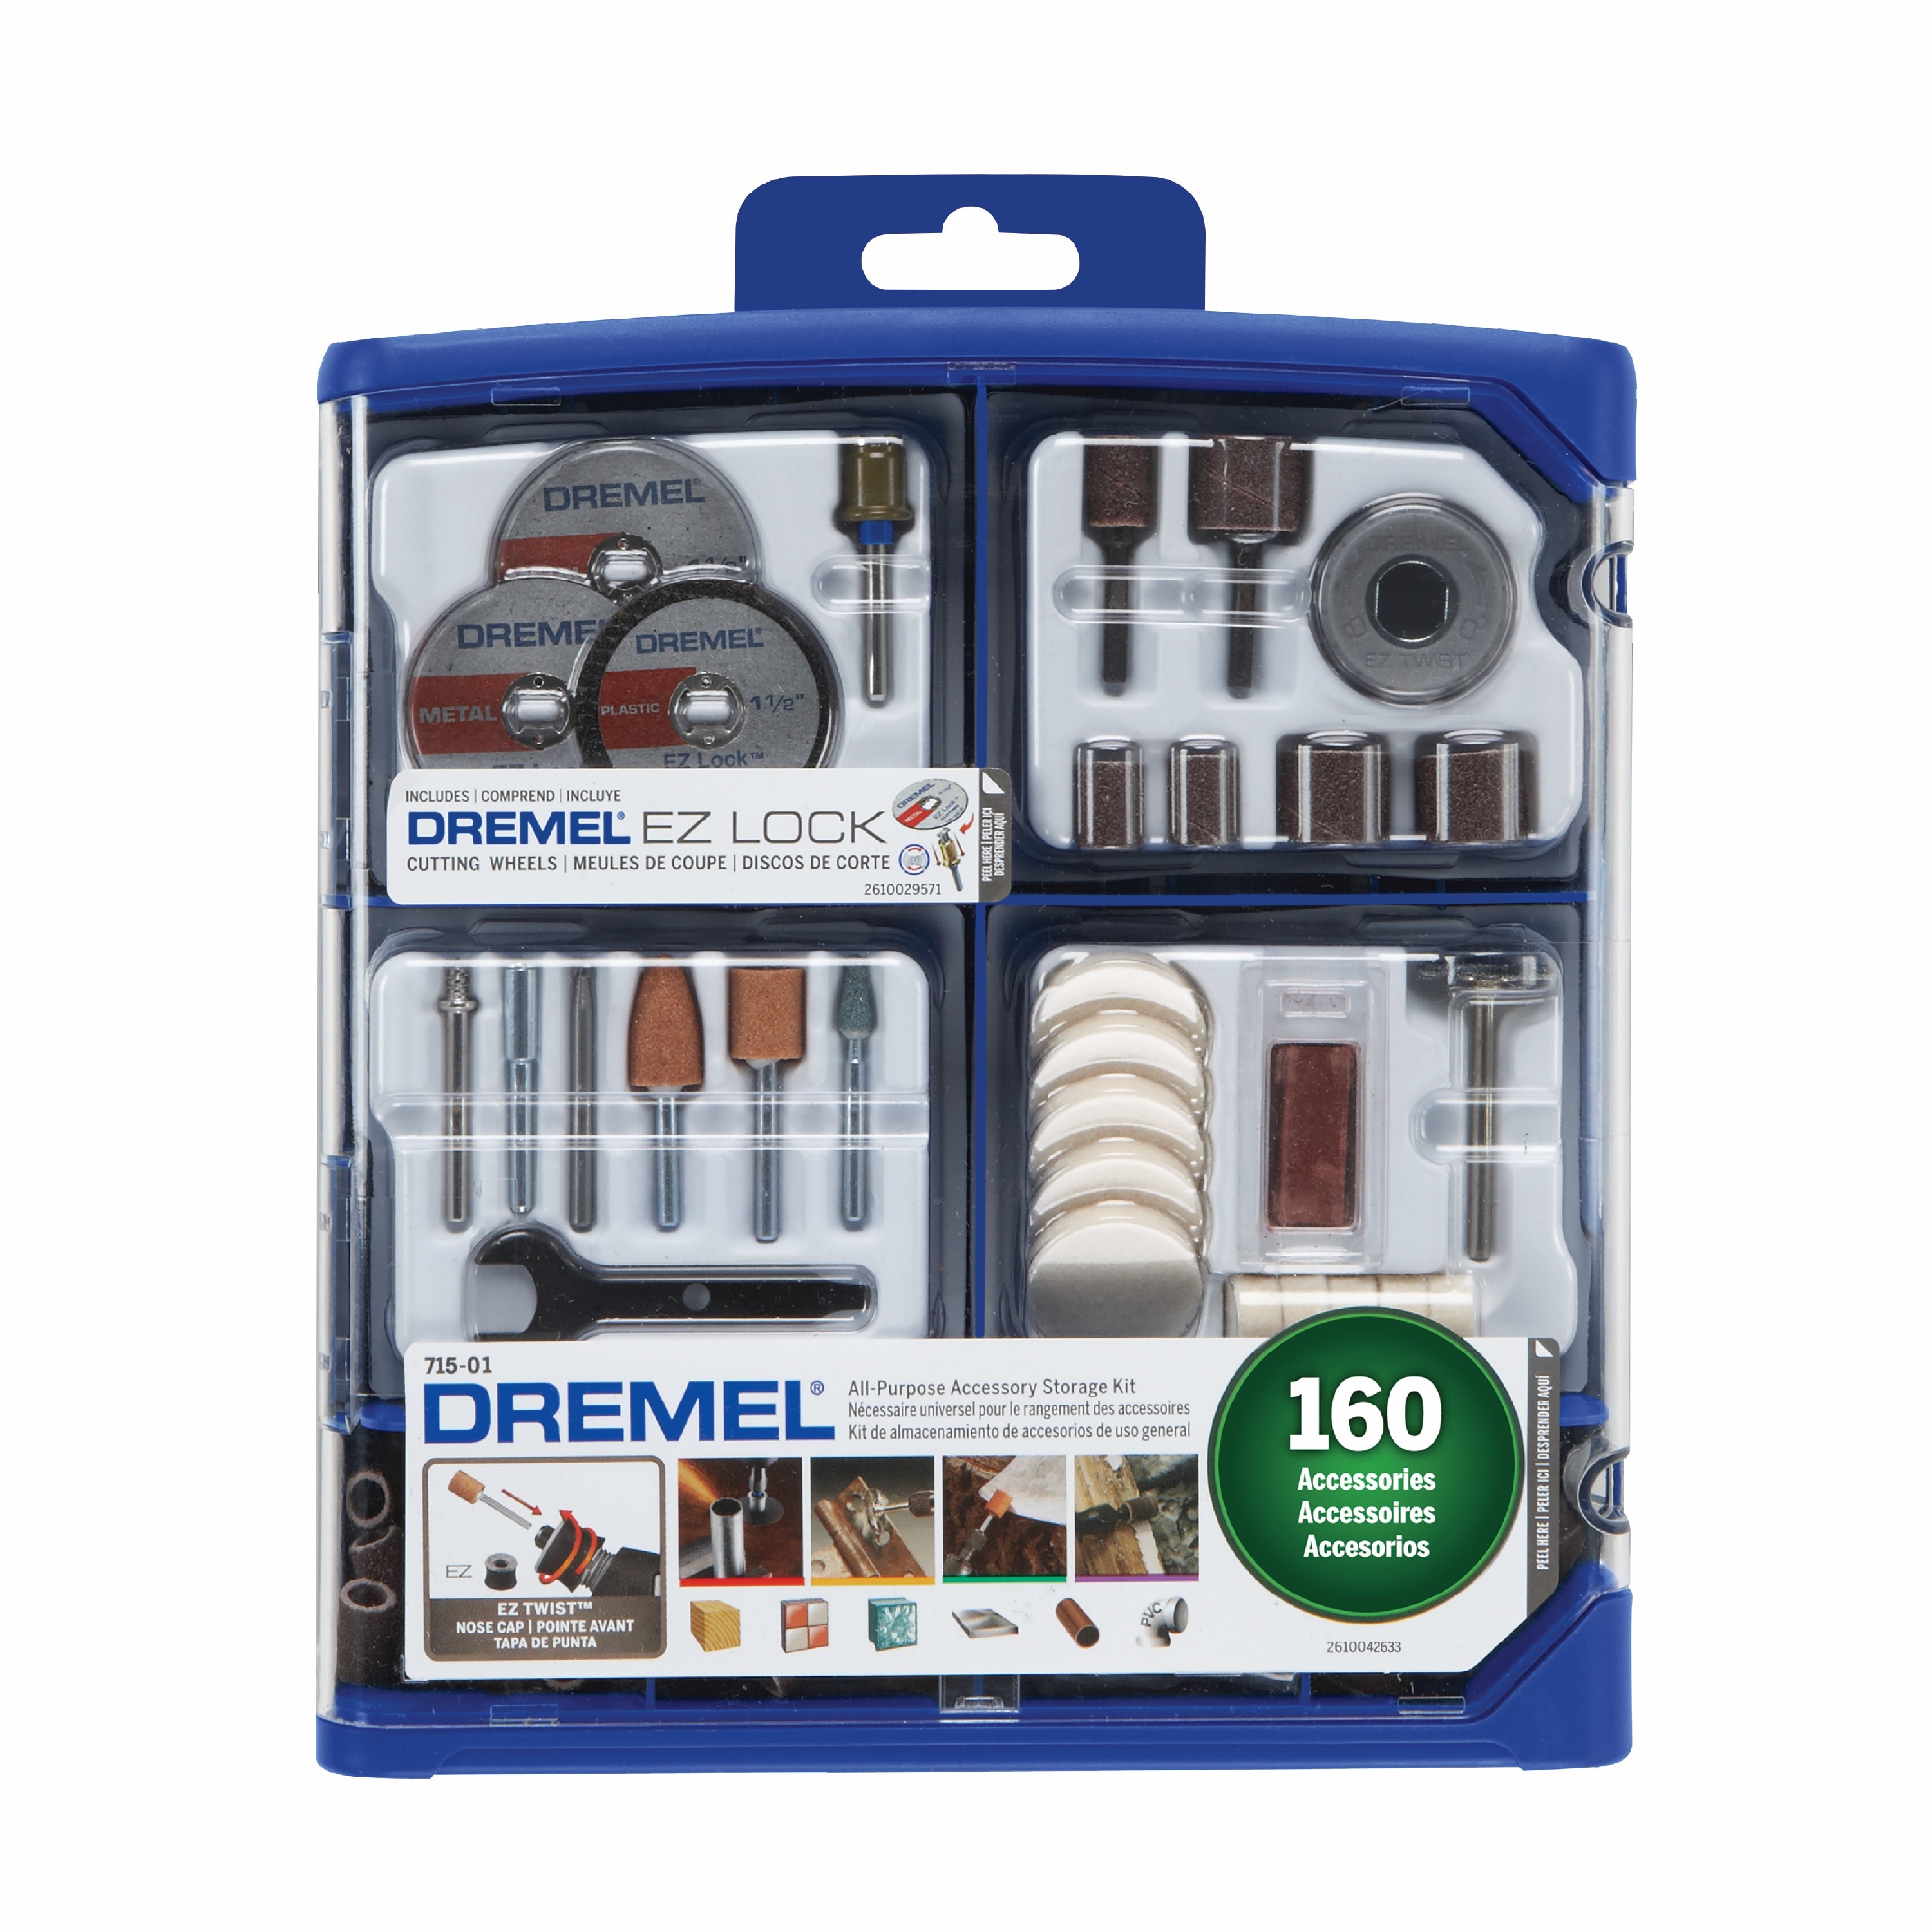 WORKPRO 306PCS Rotary Tool Accessories Kit, Fits Dremel Rotary Tool, 1/8  Shanks DIY Universal Fitment for Easy Cutting, Sanding, Grinding, Carving